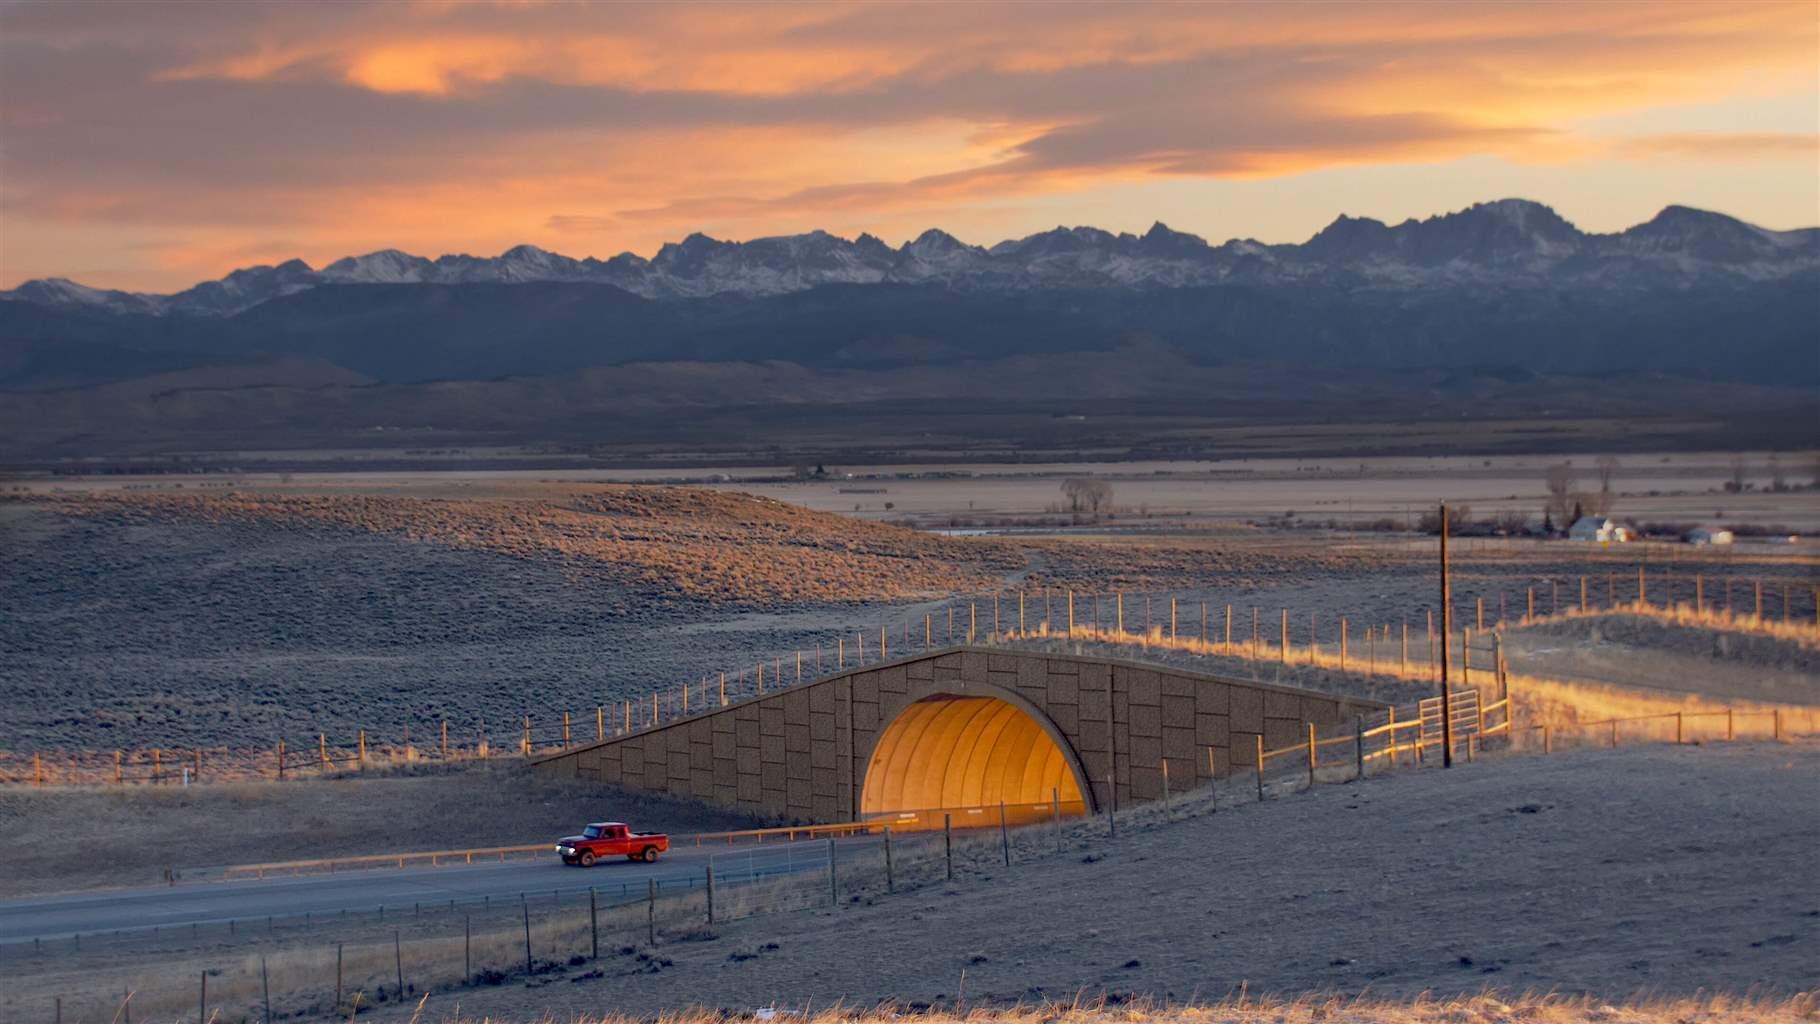 The Trappers Point wildlife crossing over U.S. Highway 191 in Wyoming. A red pickup truck emerges from the tunnel under the land bridge at sunset. The Wind River mountains are in the distance.